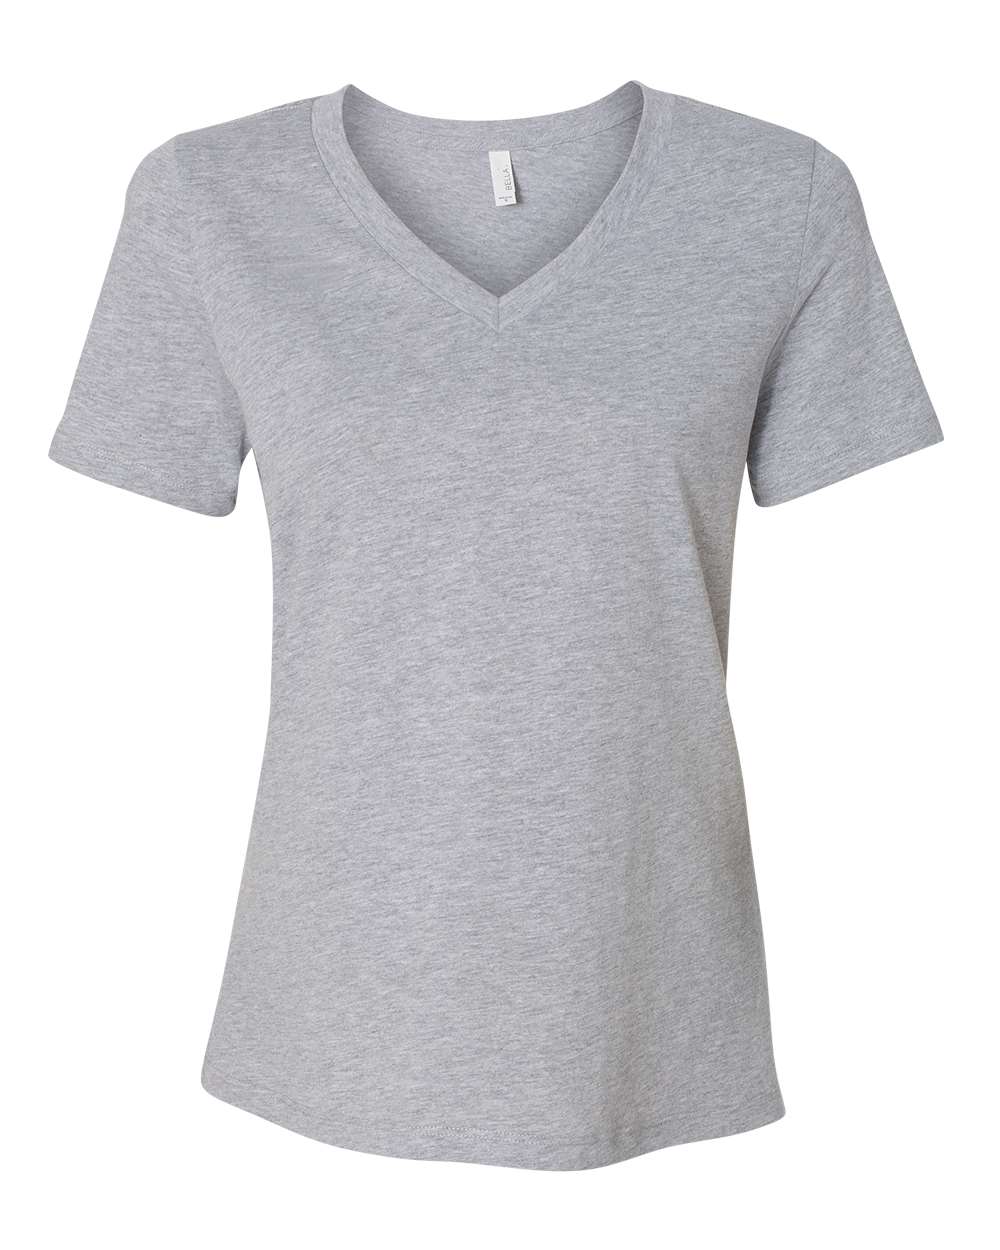 bella+canvas womens relaxed CVC v-neck tee athletic heather